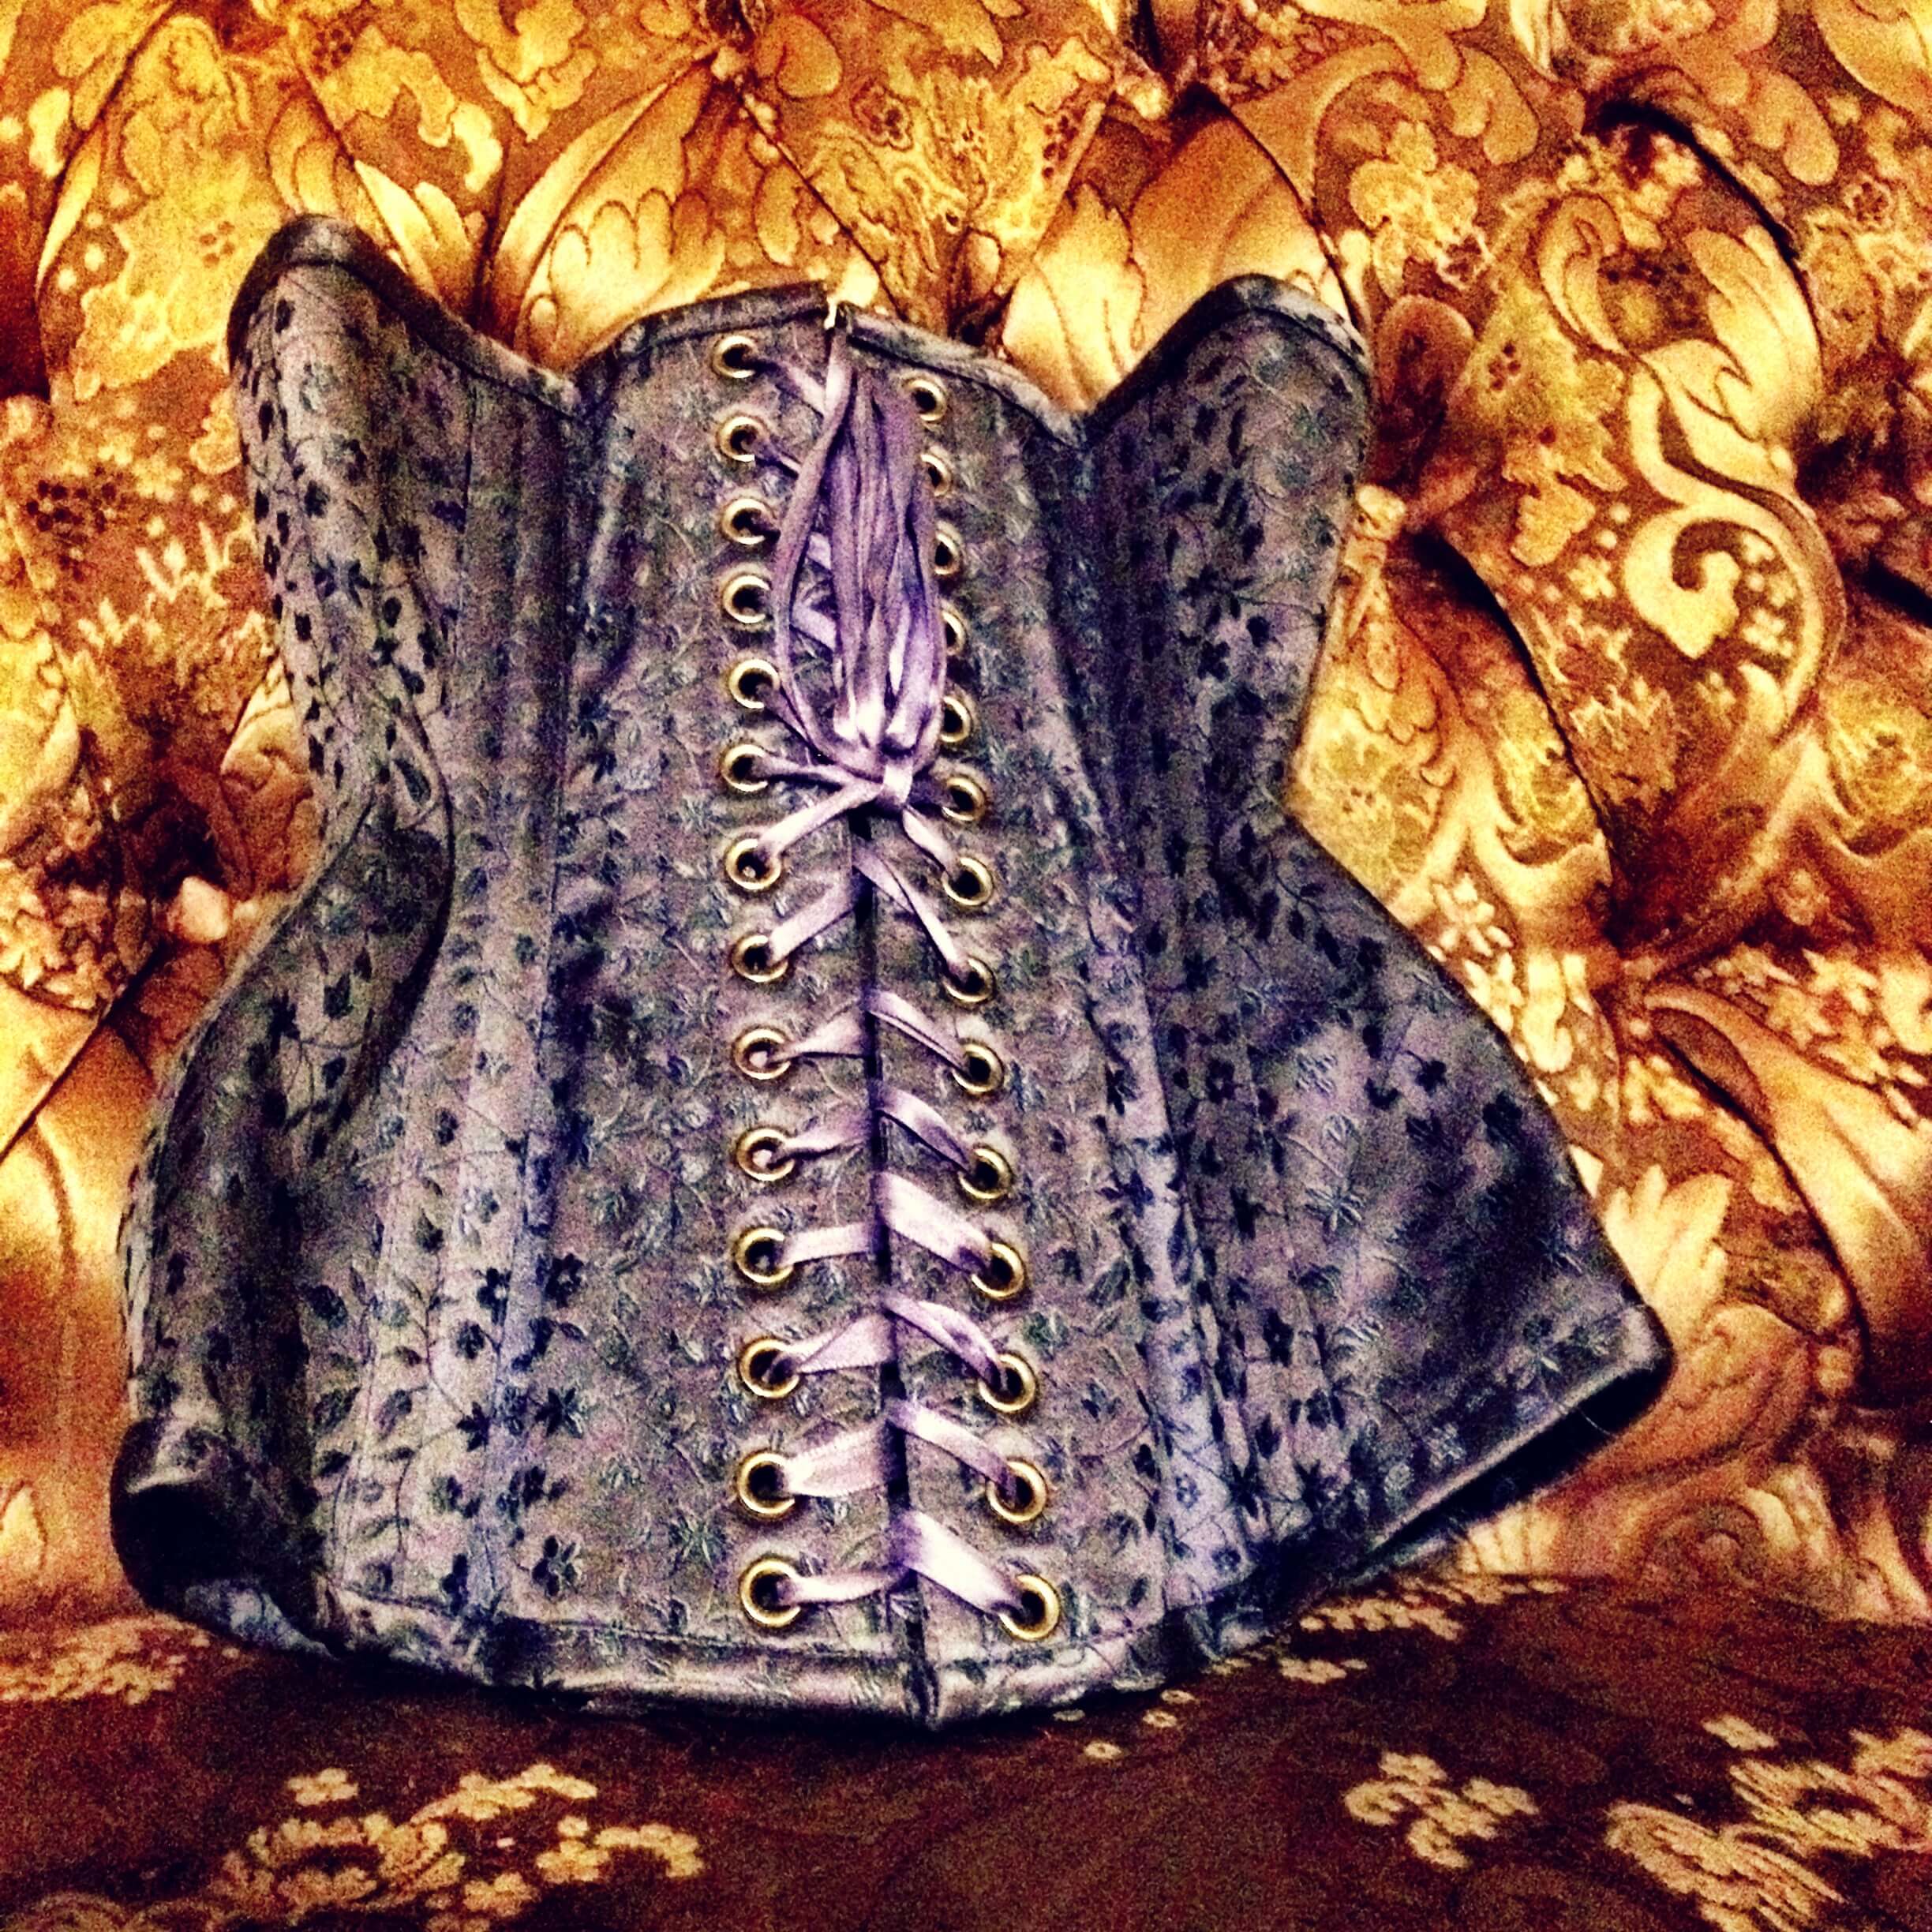 Corset Care 101: How to Store Your Corset